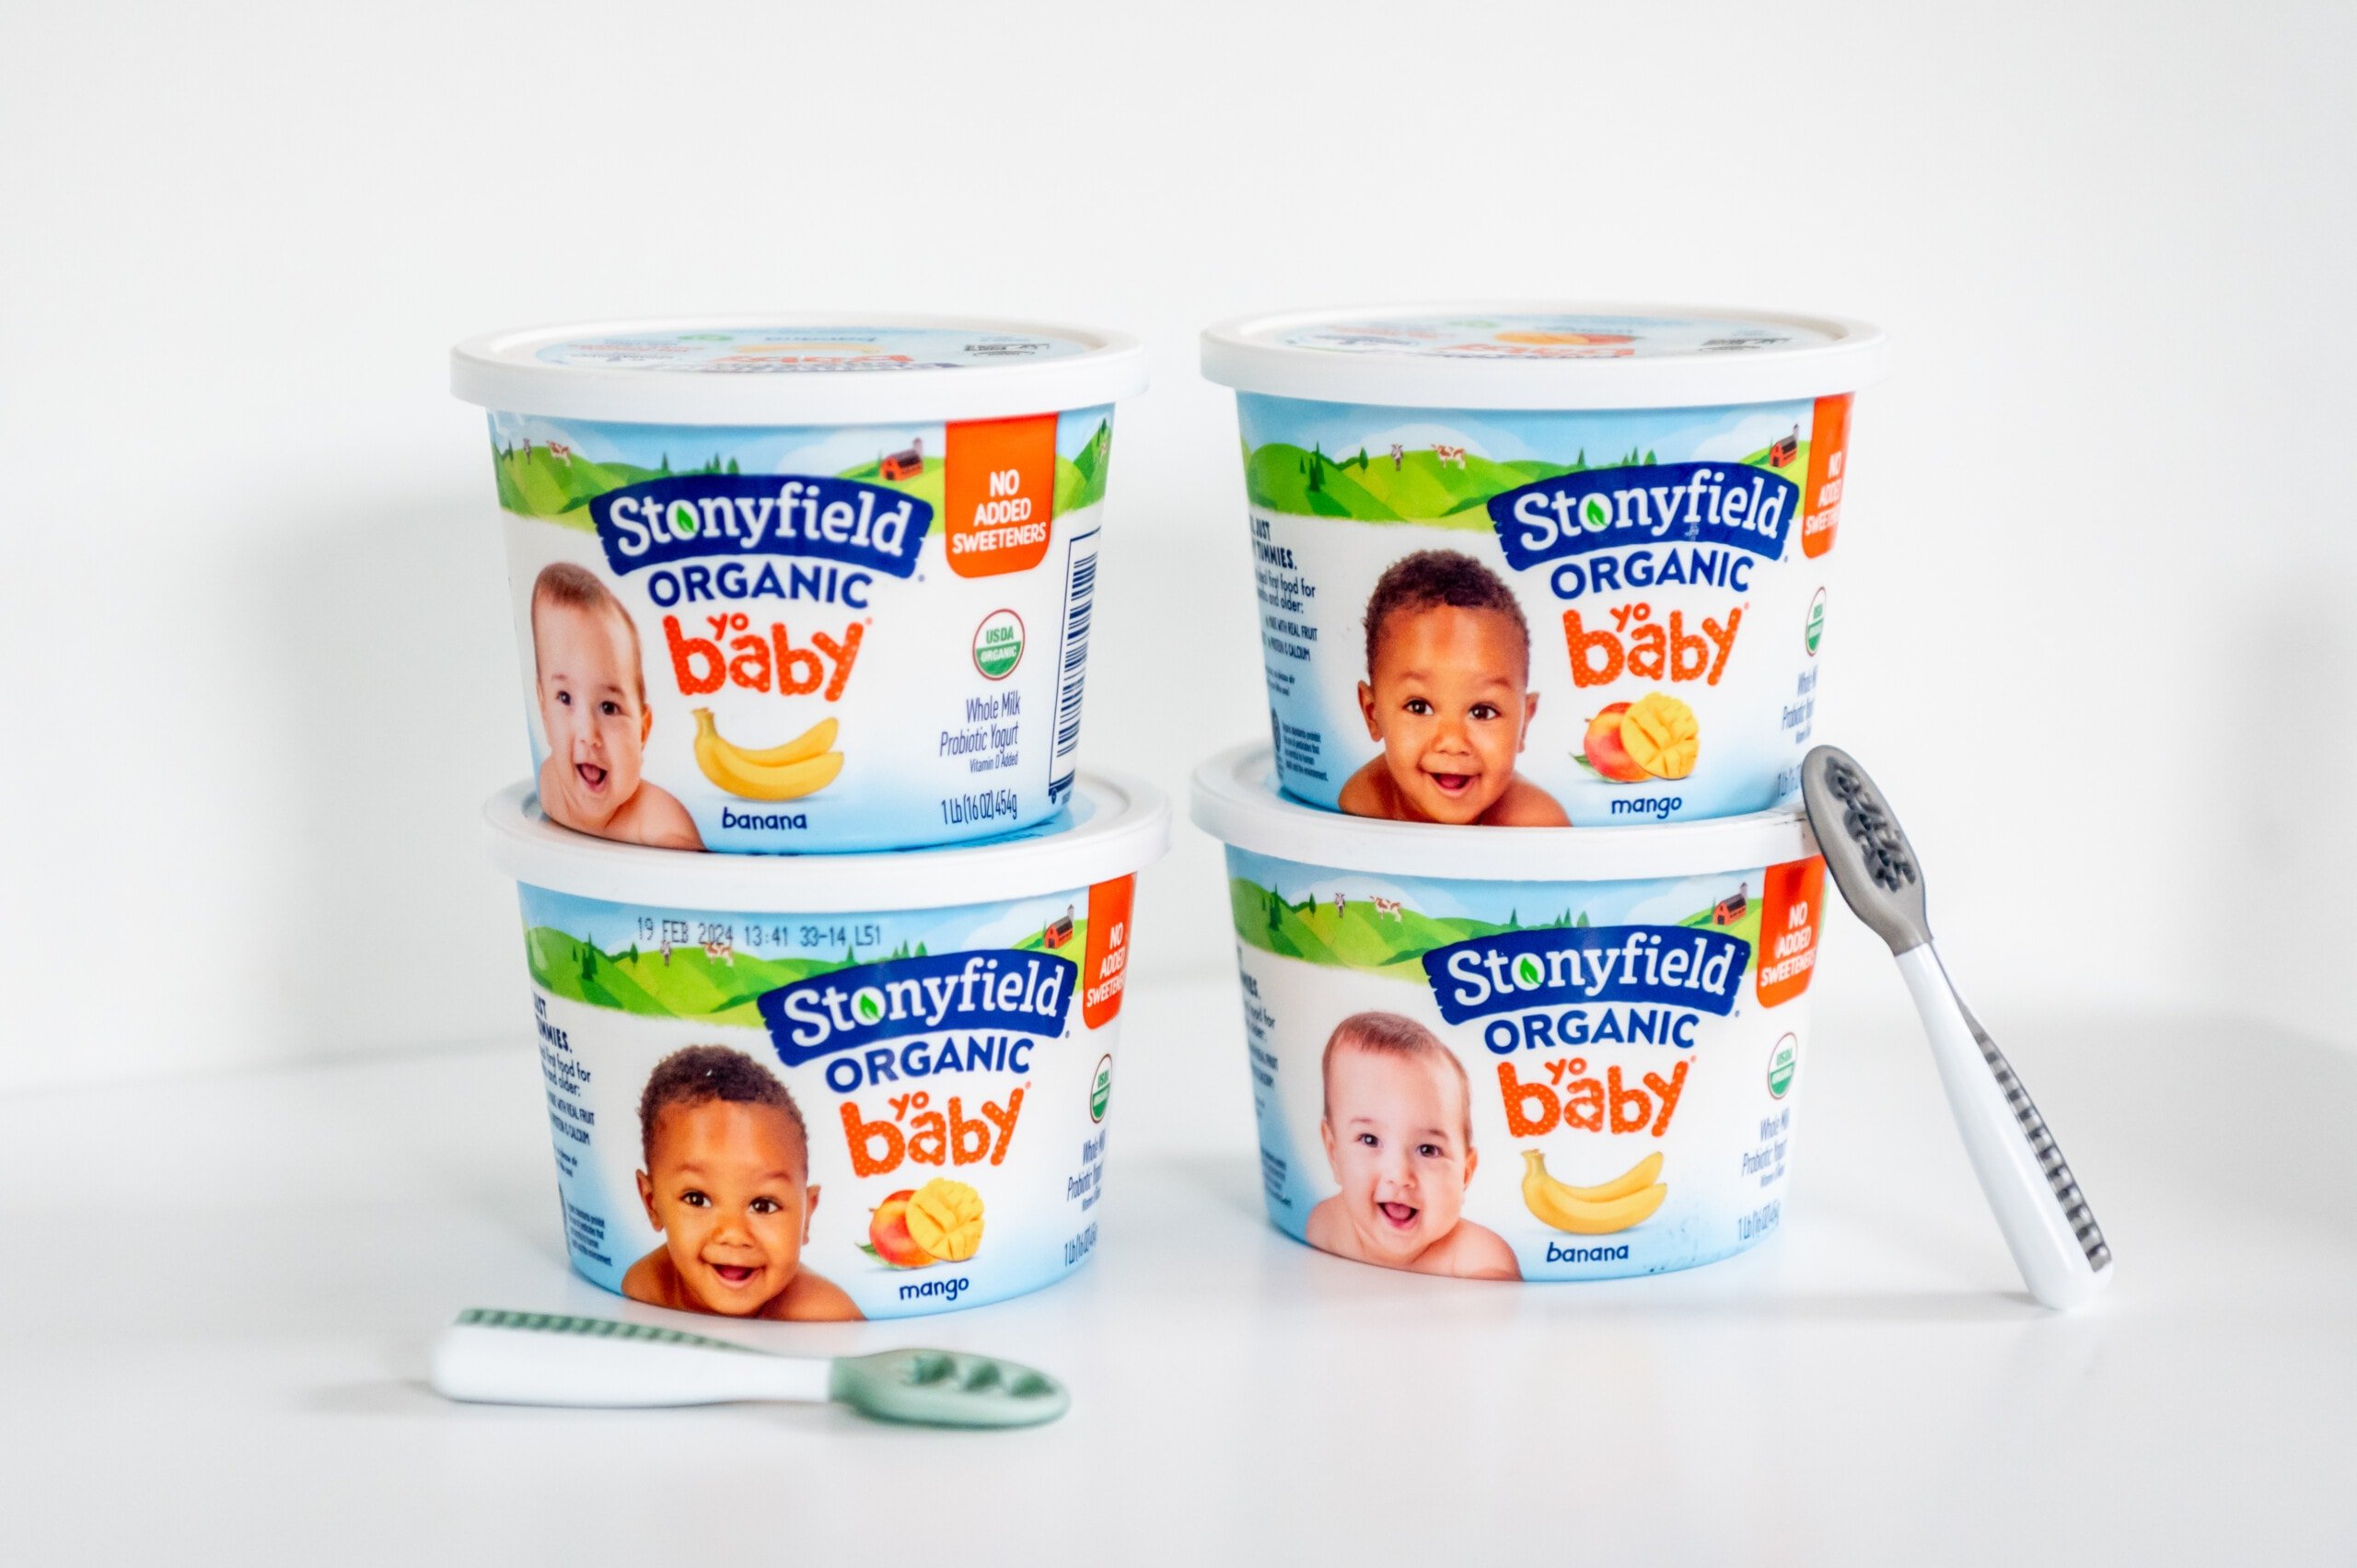 Stonyfield's new yobaby yogurt that contains no added sweeteners